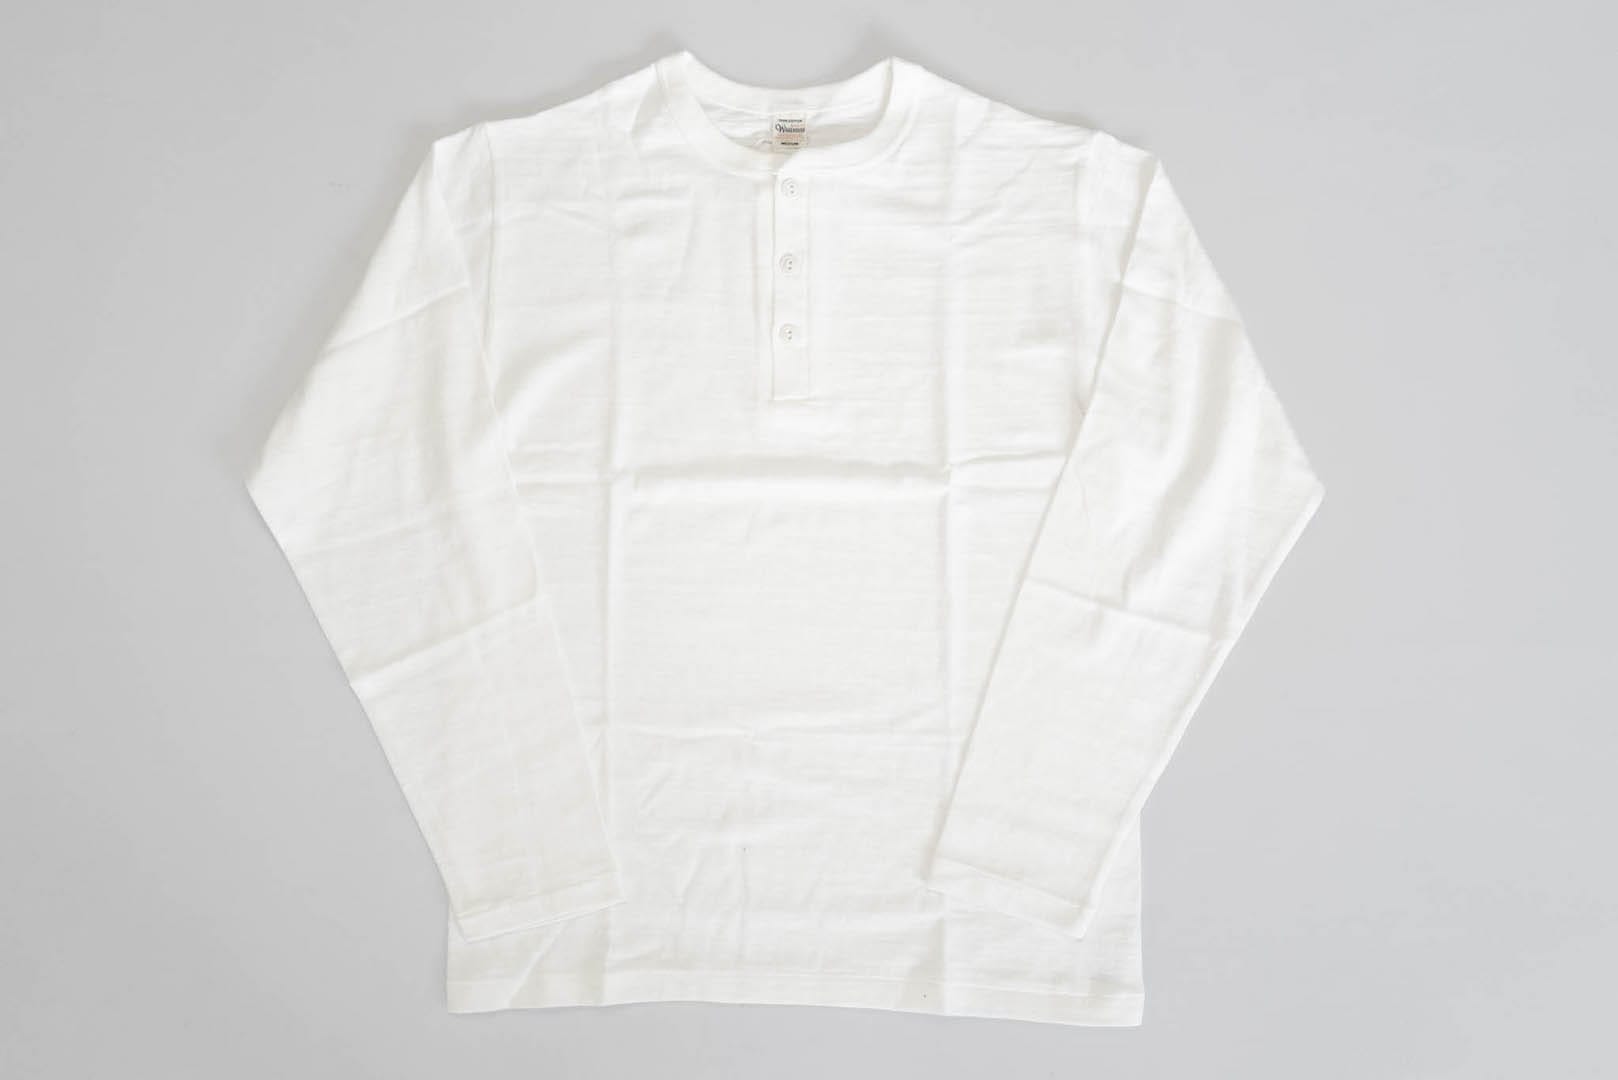 Warehouse "Bamboo Textured" L/S Henley Tee (White)